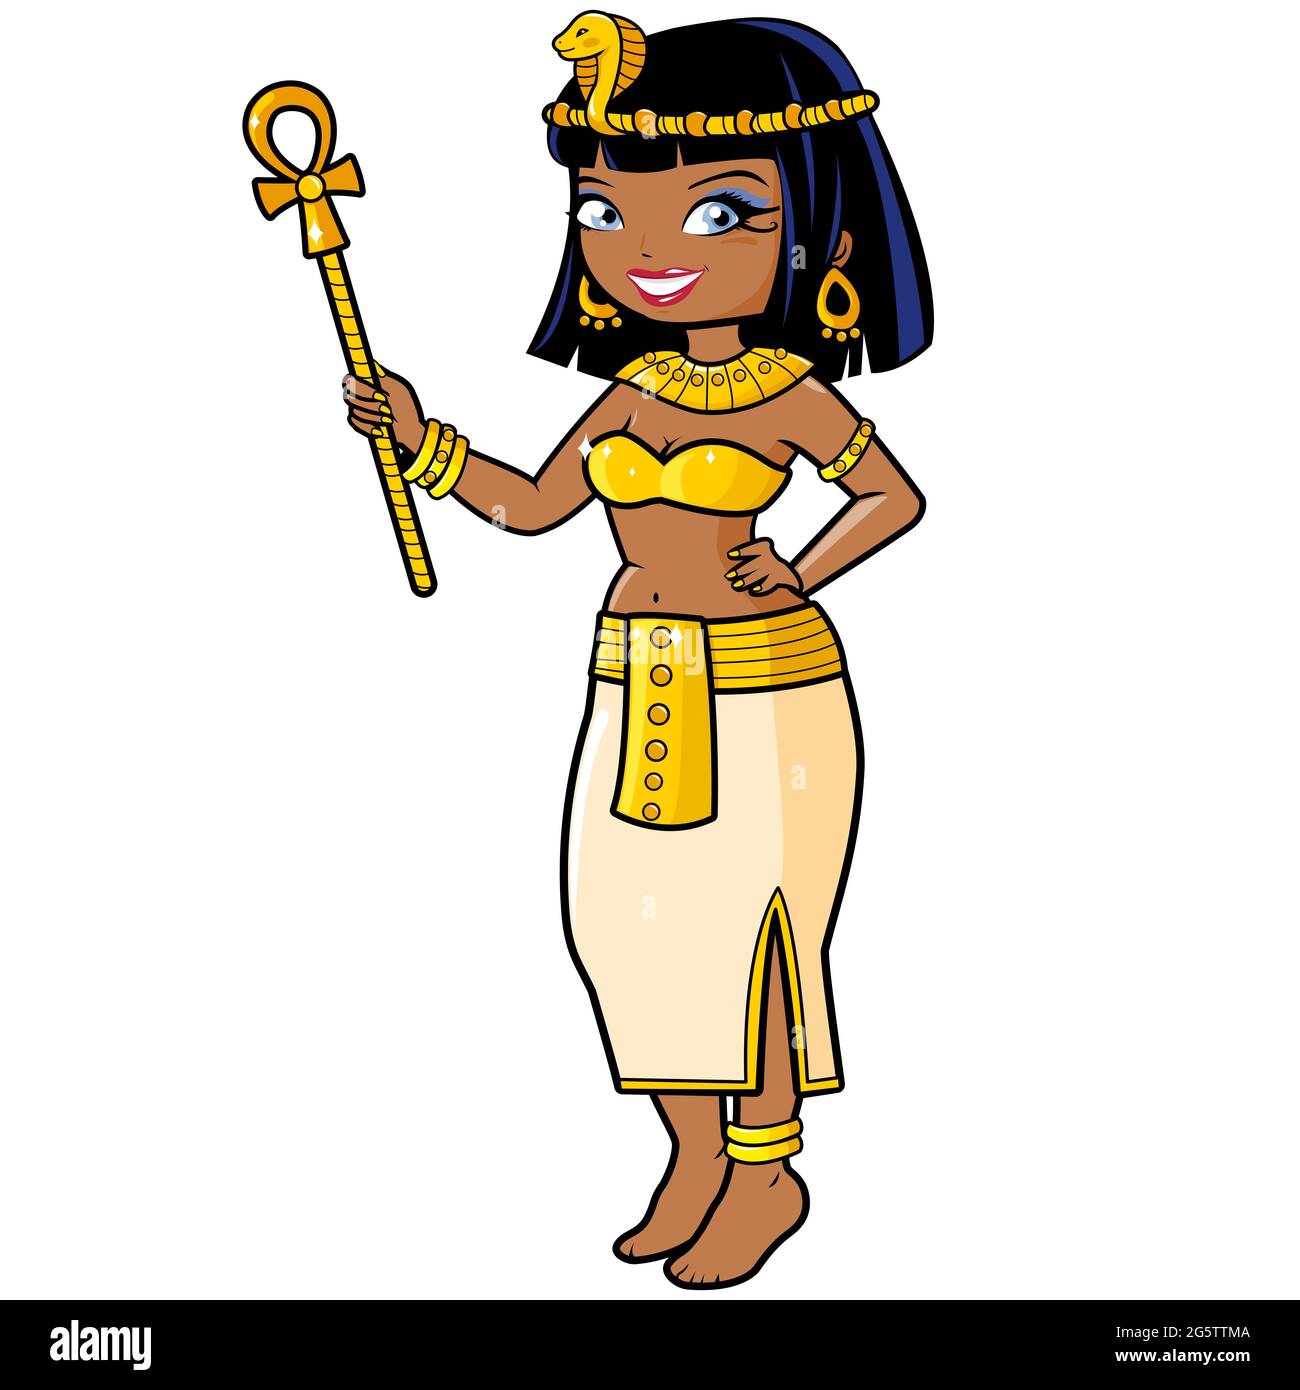 Cleopatra queen of ancient Egypt holding Ankh staff. Stock Photo